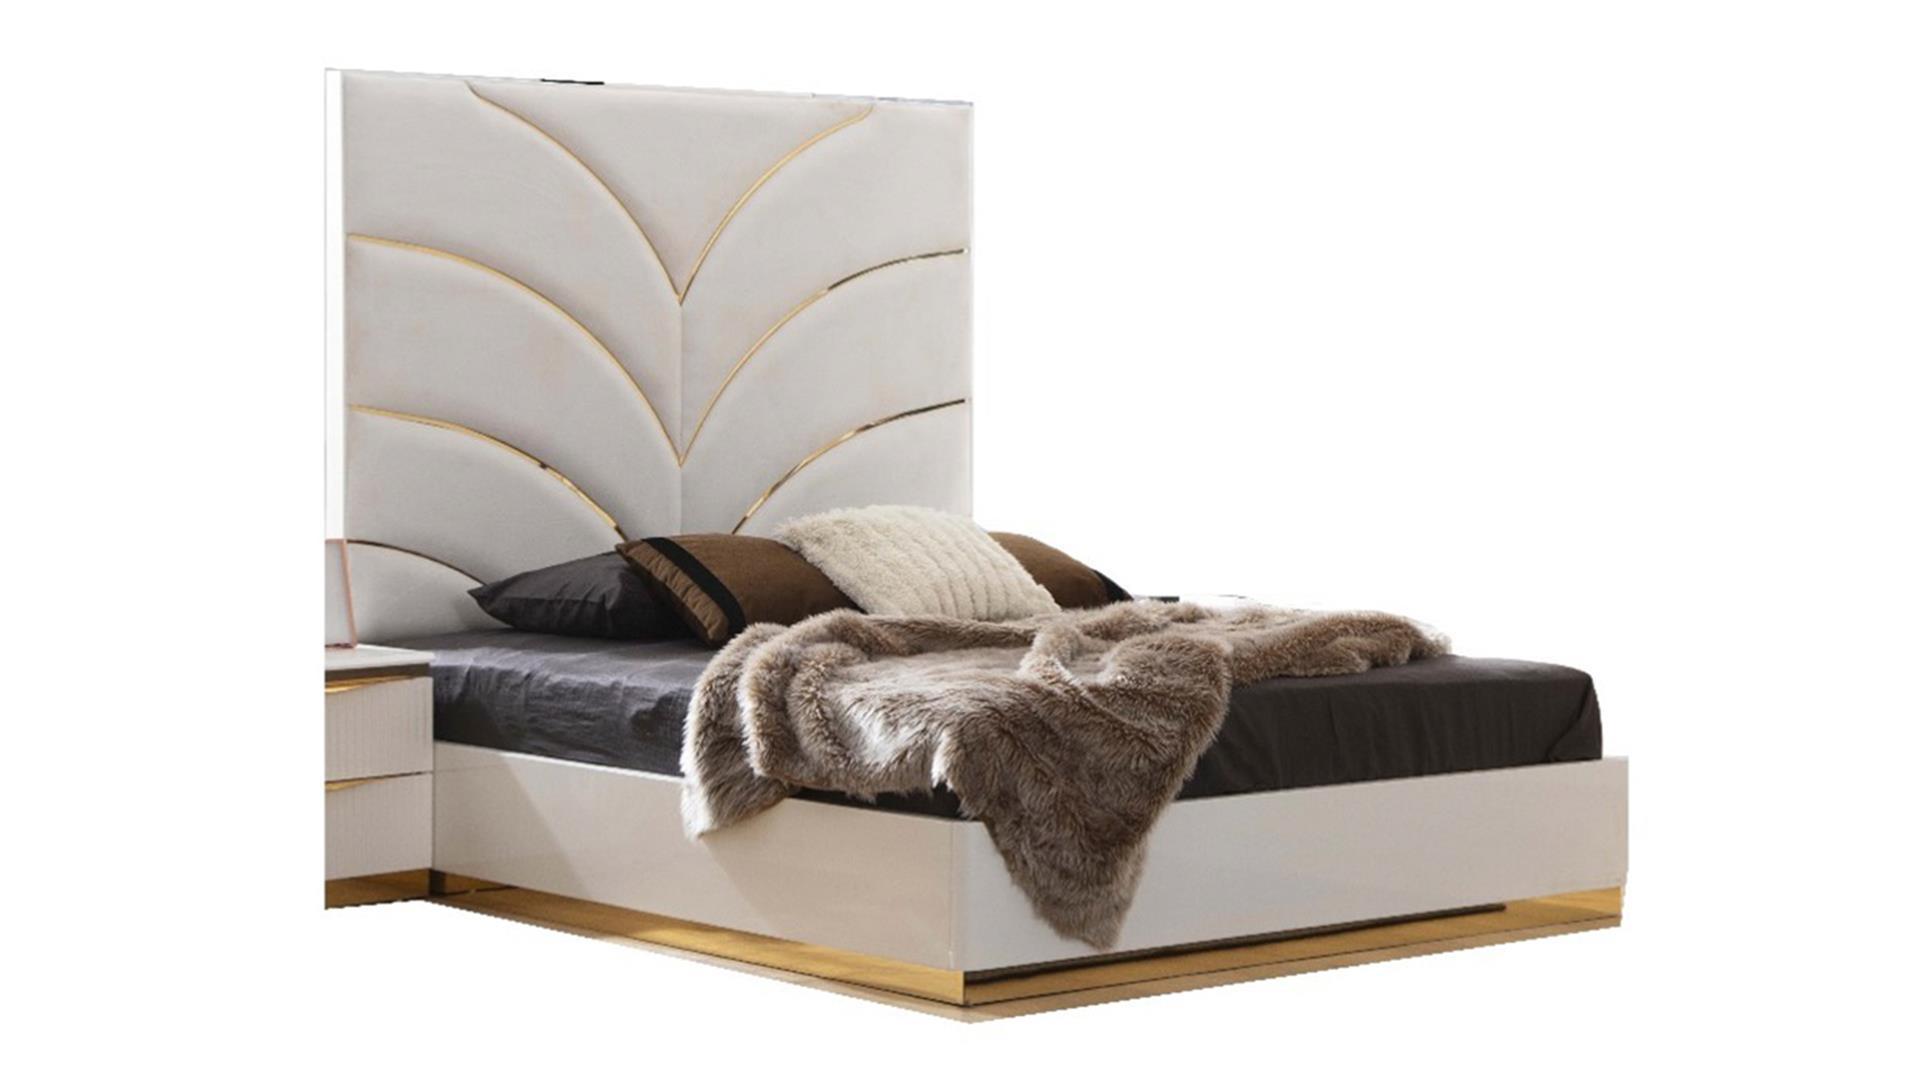 

    
Glam White & Gold King Bed LAURA Galaxy Home Contemporary Luxury
